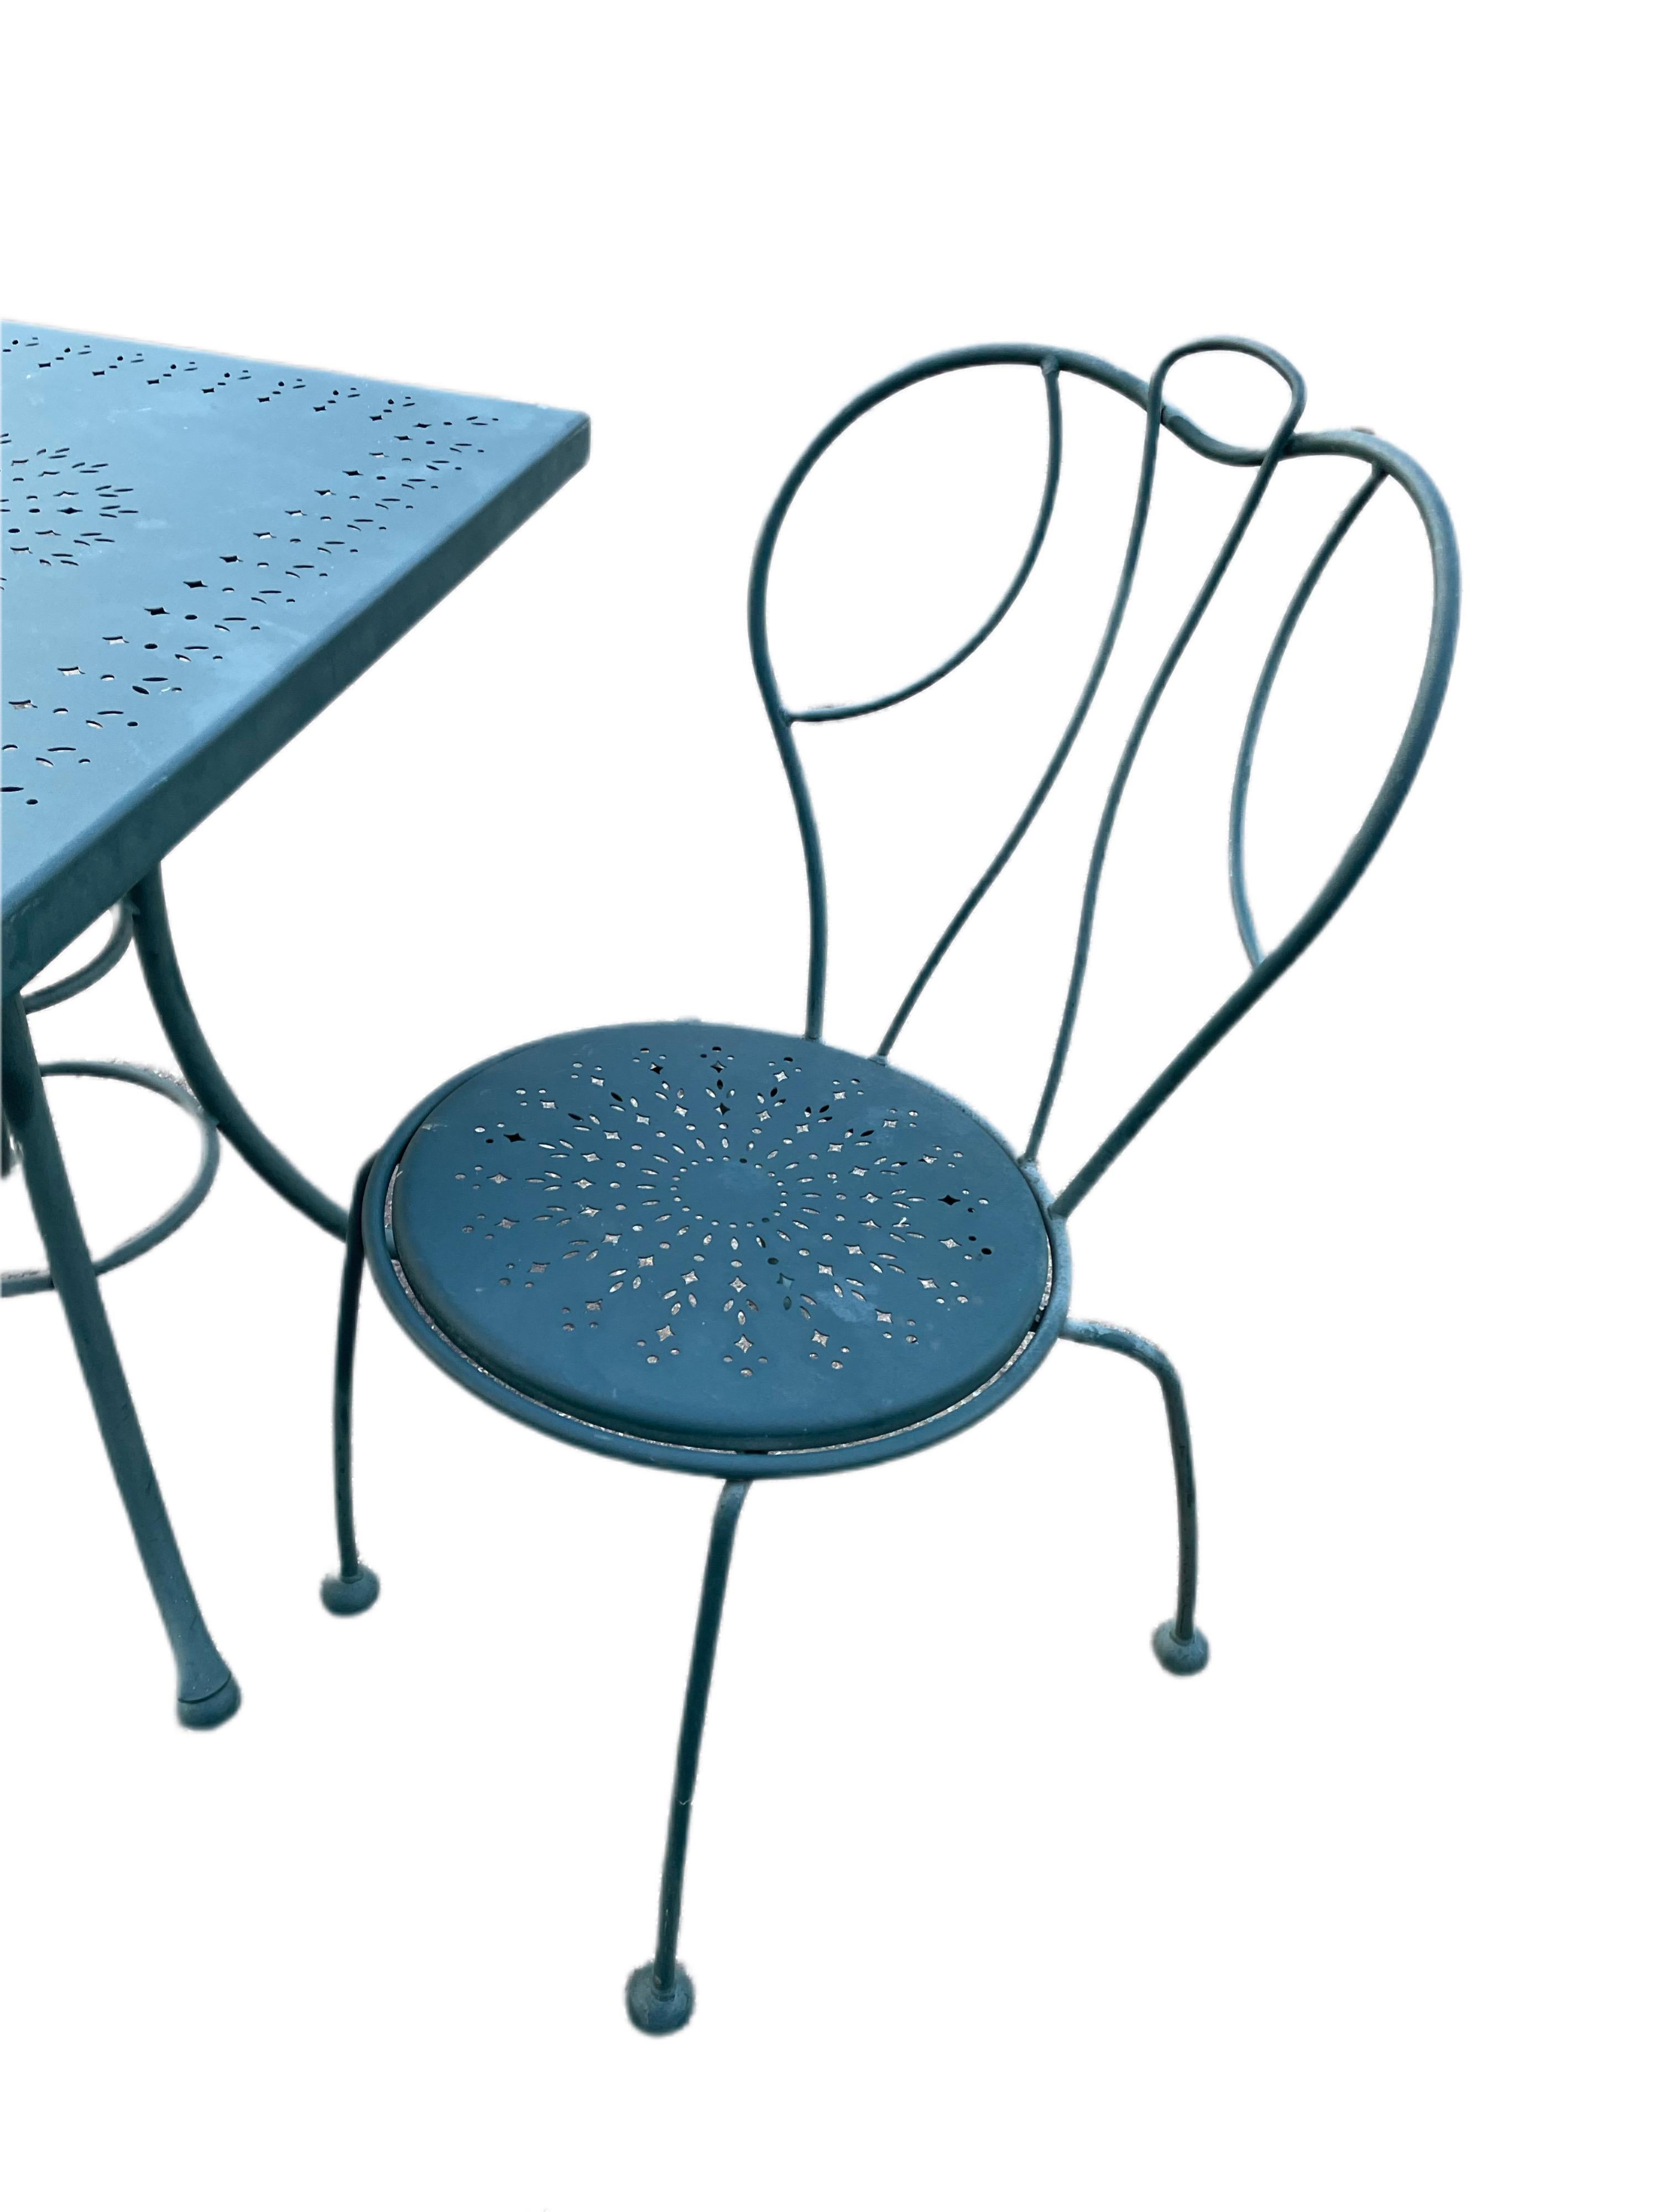 Available now for your enjoyment and ready to ship is a Vintage Wrought Iron Patio Cafe set made by Woodard. 

This lovely Wrought Iron three piece Set of a pair of Chairs and matching table are the perfect addition to any garden, terrace, or